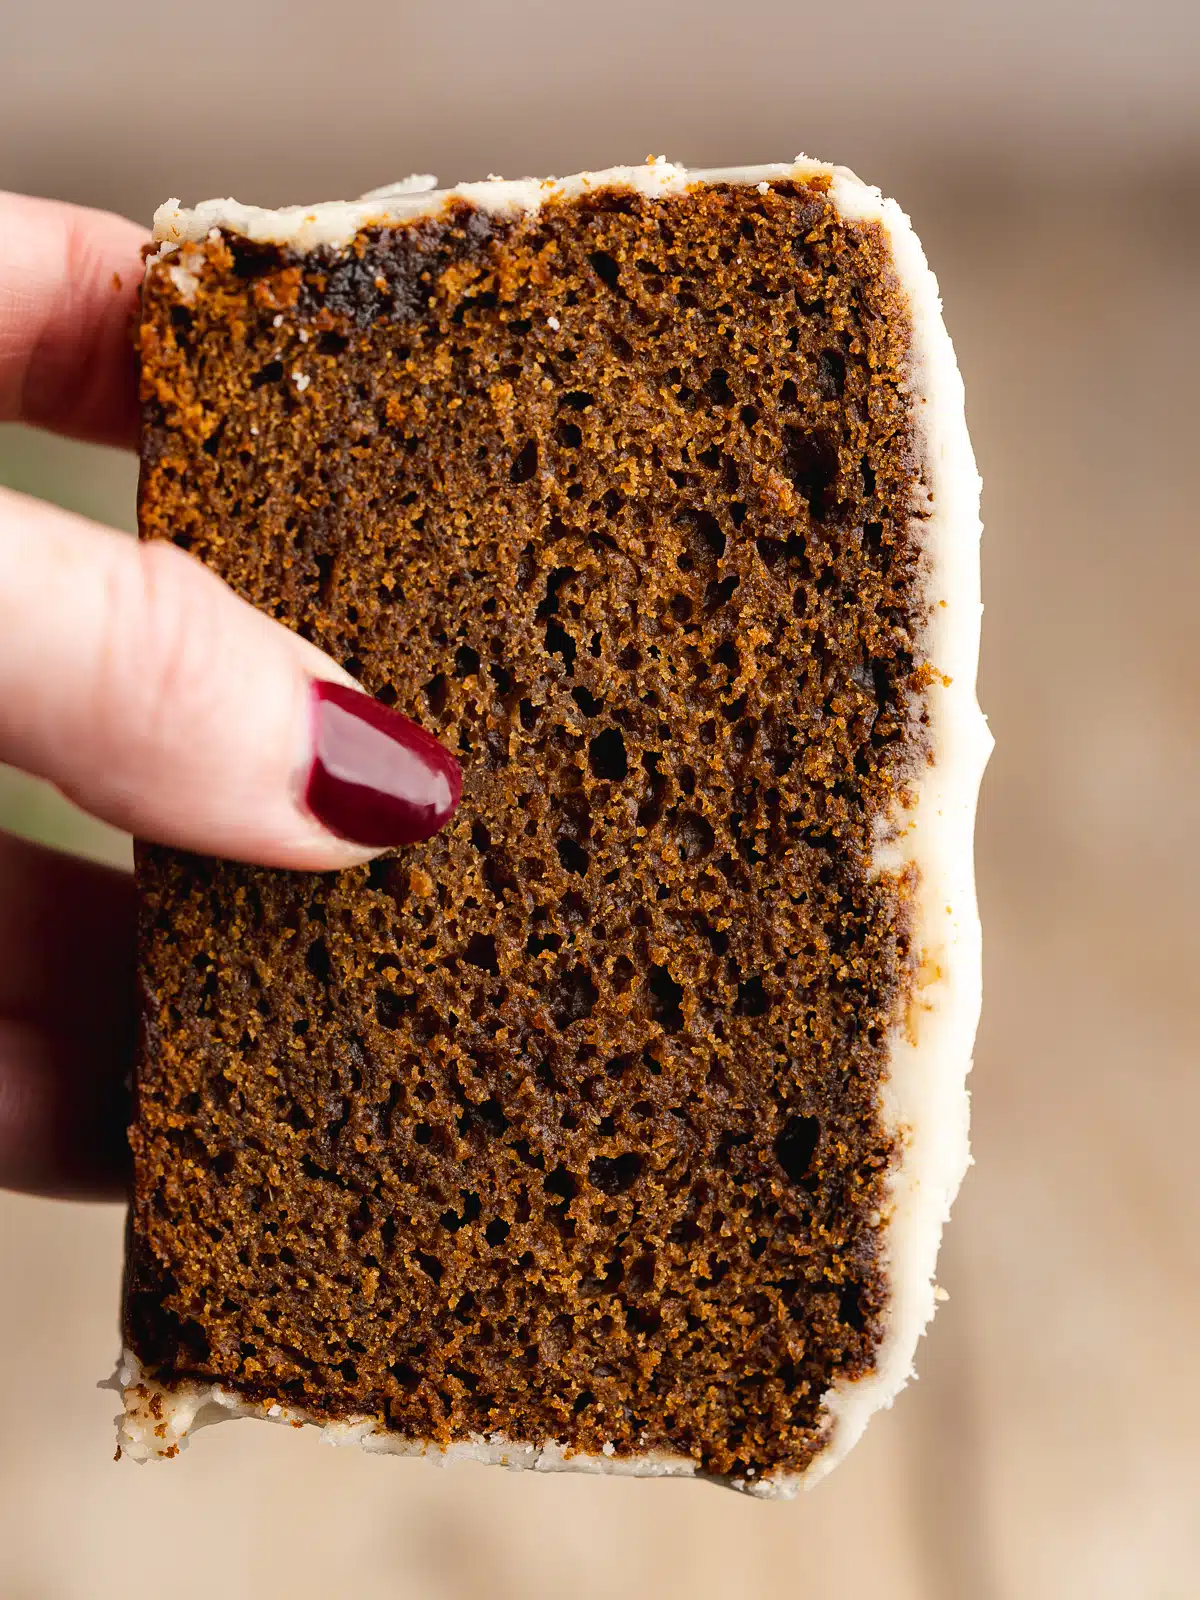 a hand holding up a slice of gingerbread cake with cream cheese icing, showing the moist and fluffy consistency.